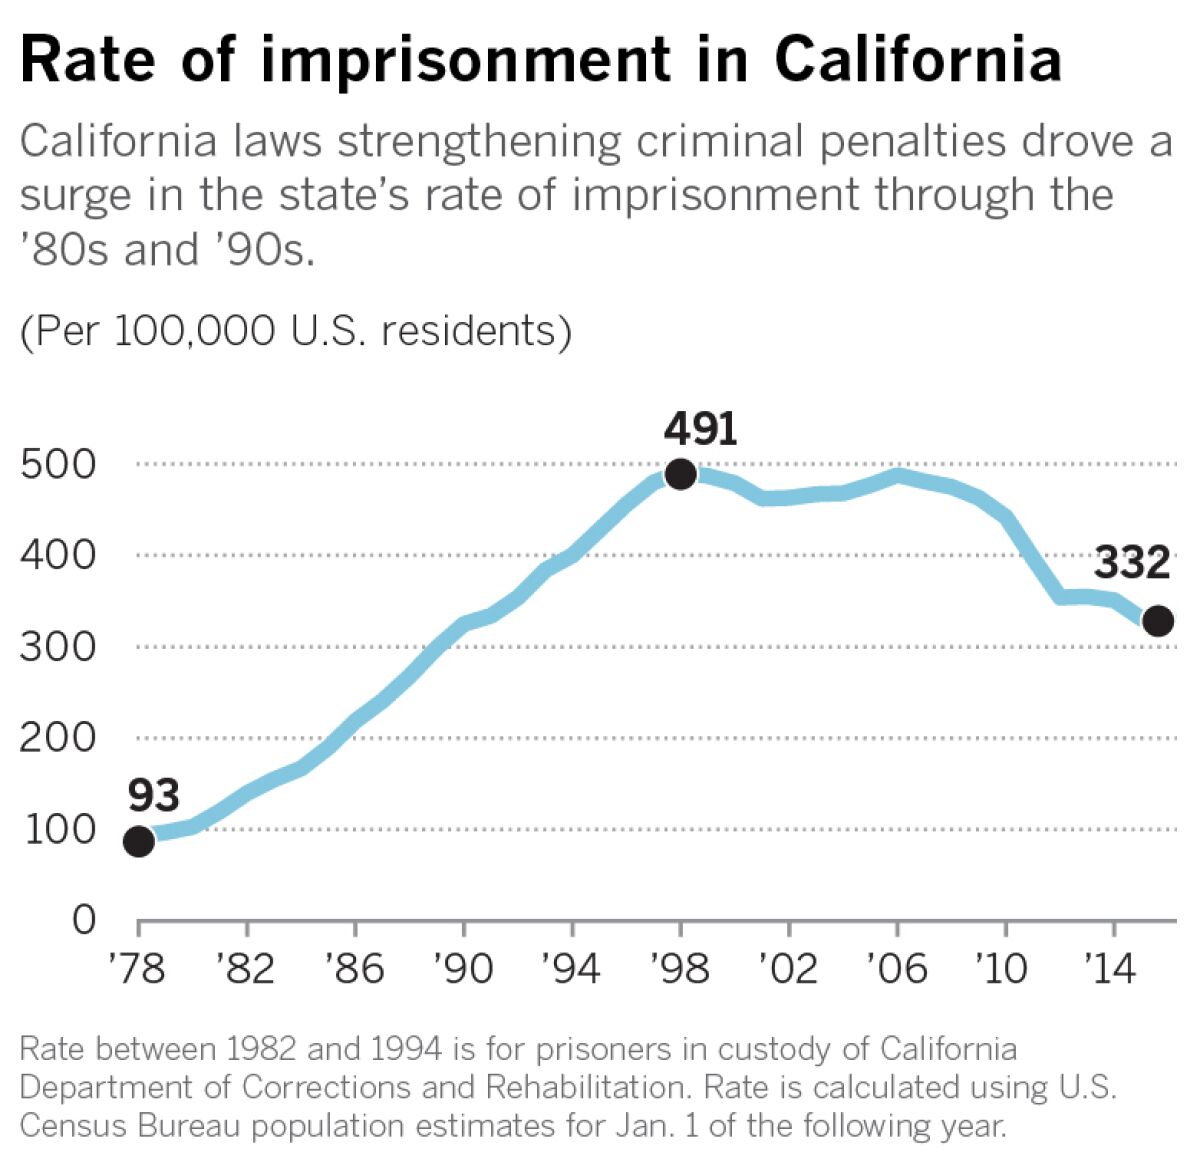 California laws strengthening criminal penalties drove a surge in the state’s rate of imprisonment through the '80s and ‘90s. 